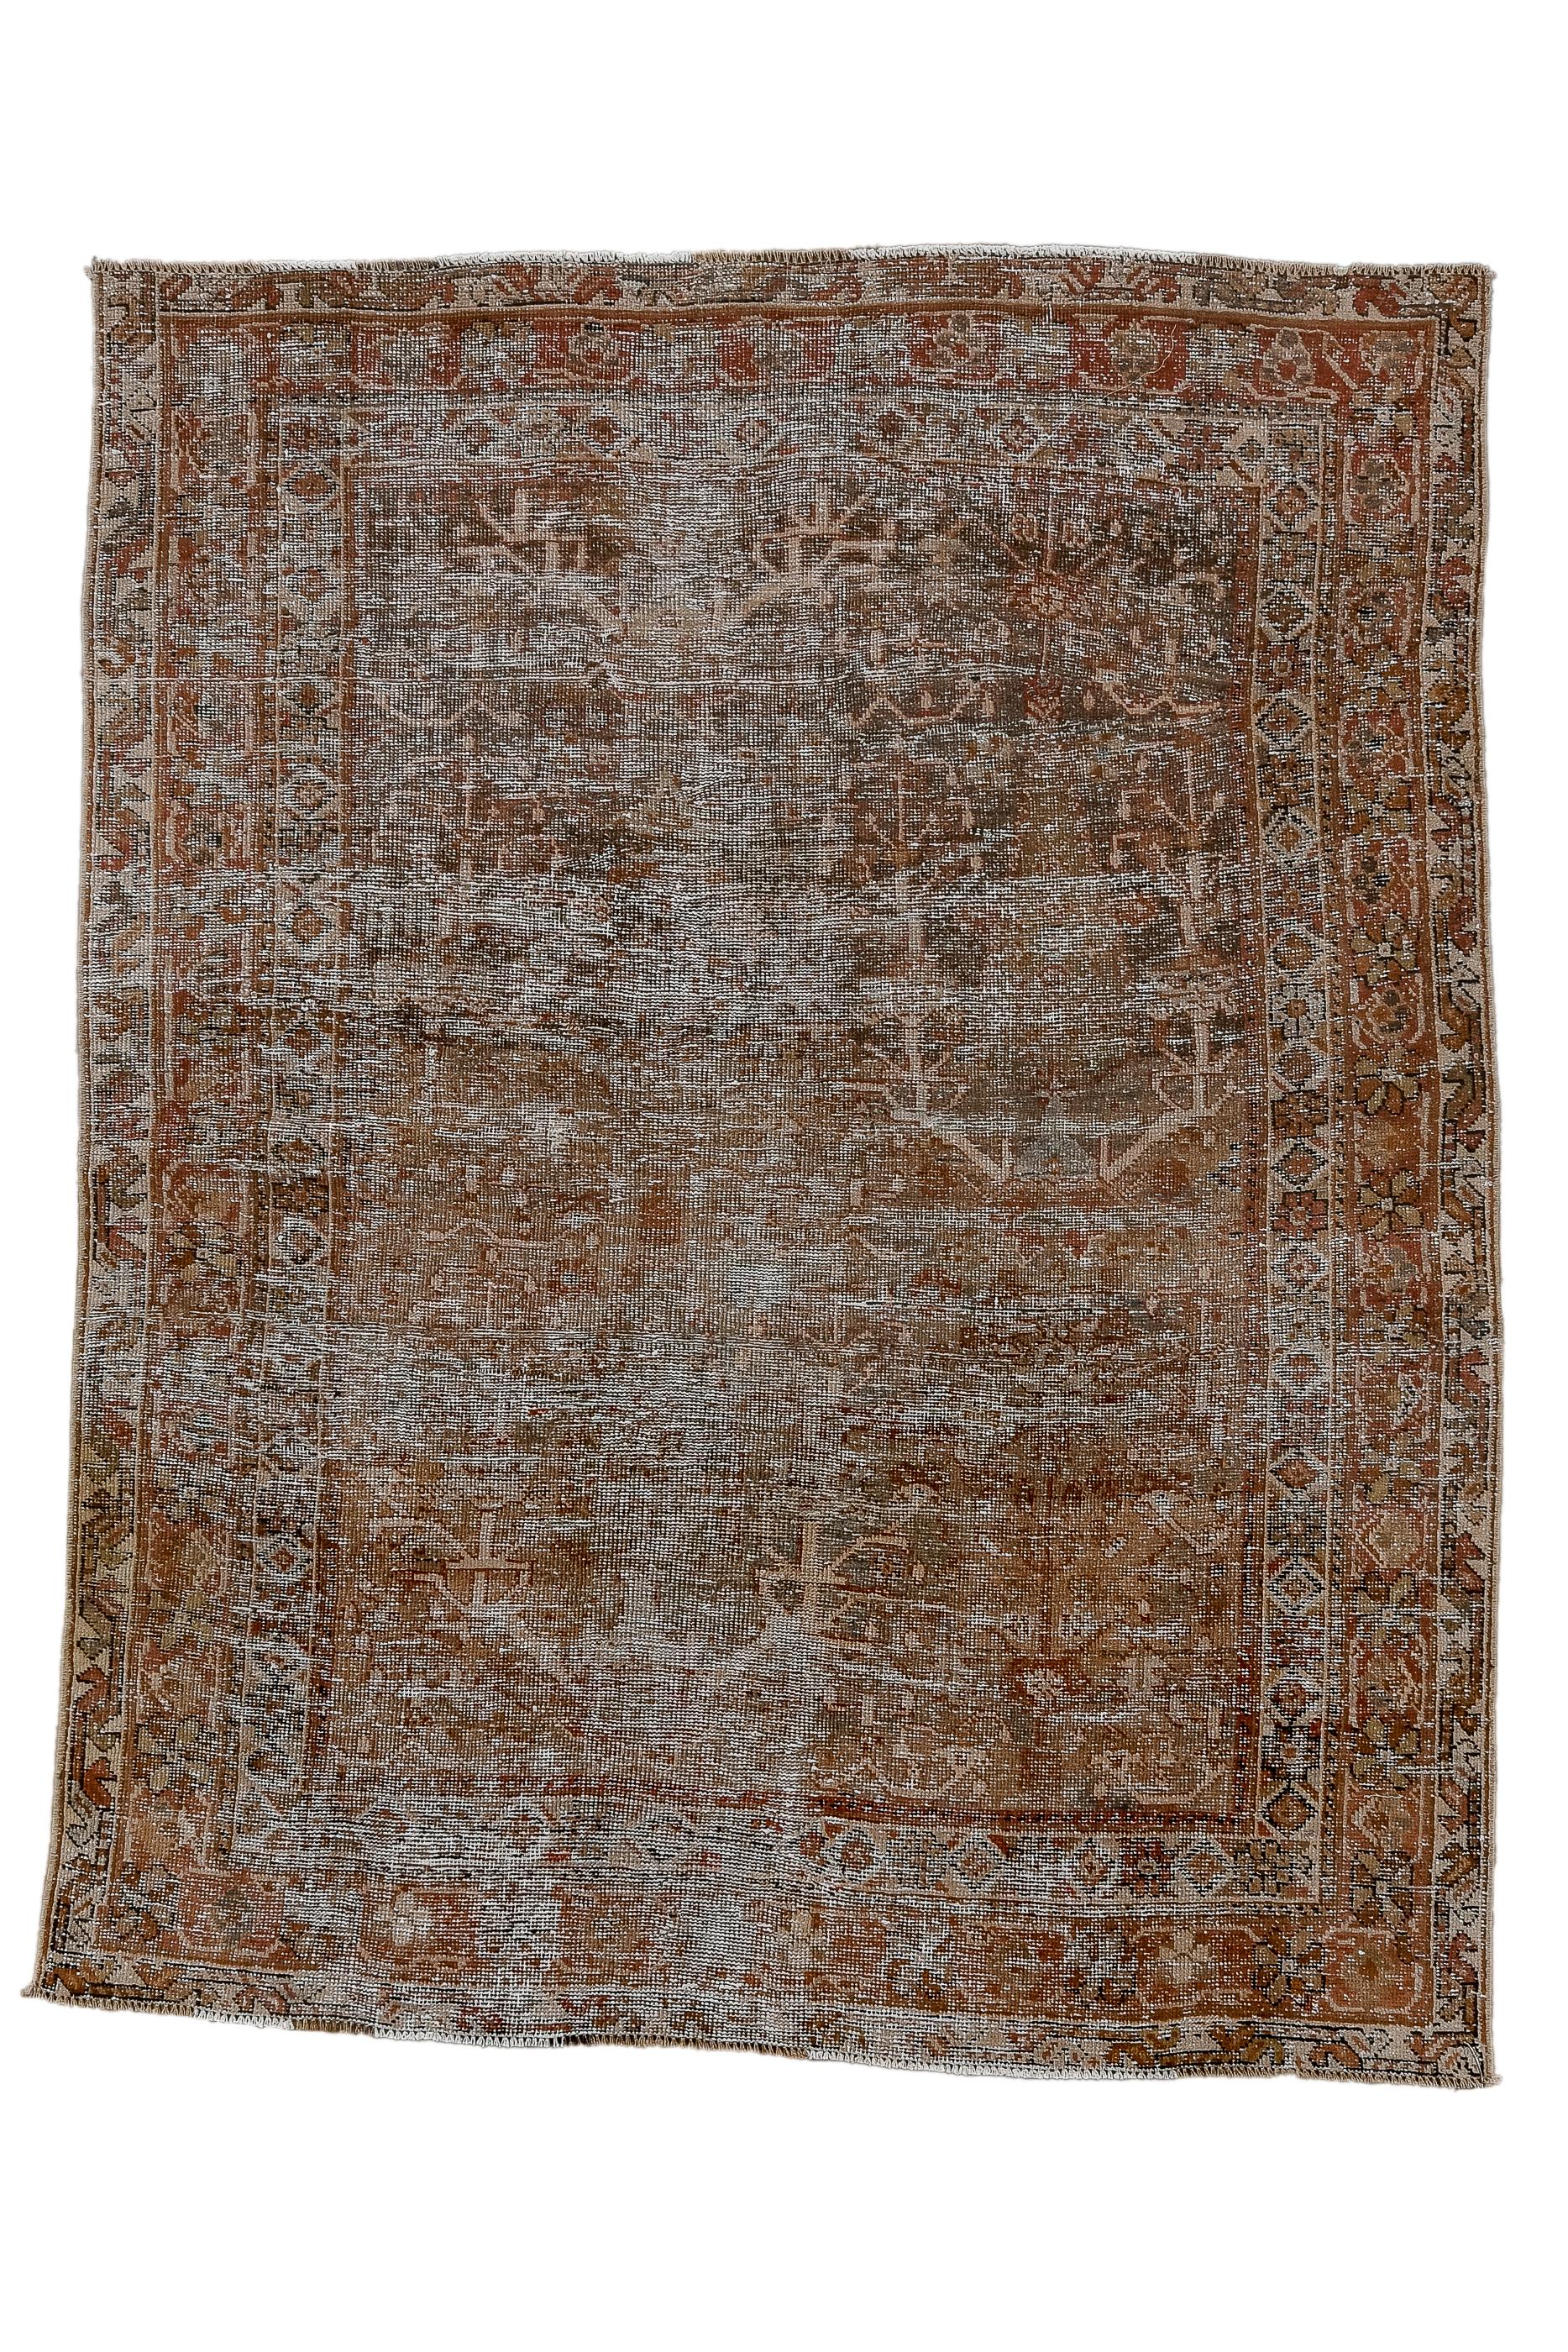 Although obviously distressed, this village scatter still shows a rust madder field with spindly straw stems. Rust main border, and non-matching ecru minor stripes. 

Rug Size
4'2x5'2